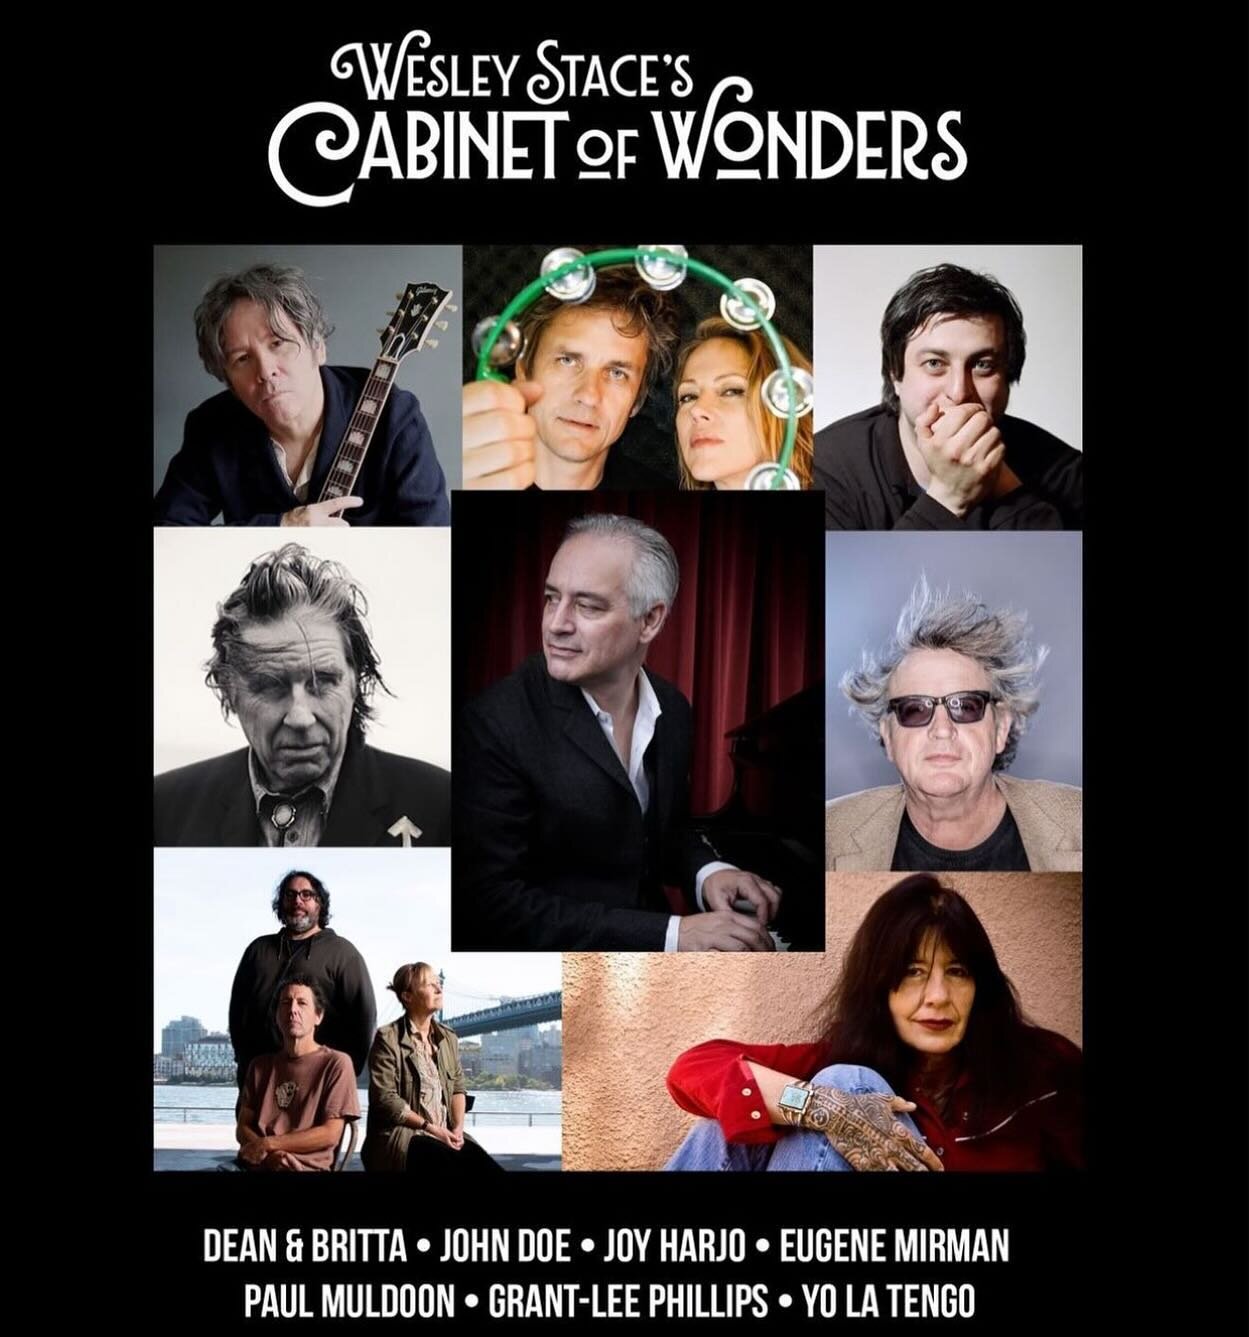 Tulsa! I will be performing at the Philbrook Museum of Art as part of this wonderful Cabinet of Wonders lineup on March 10! Tix available through the Internet.